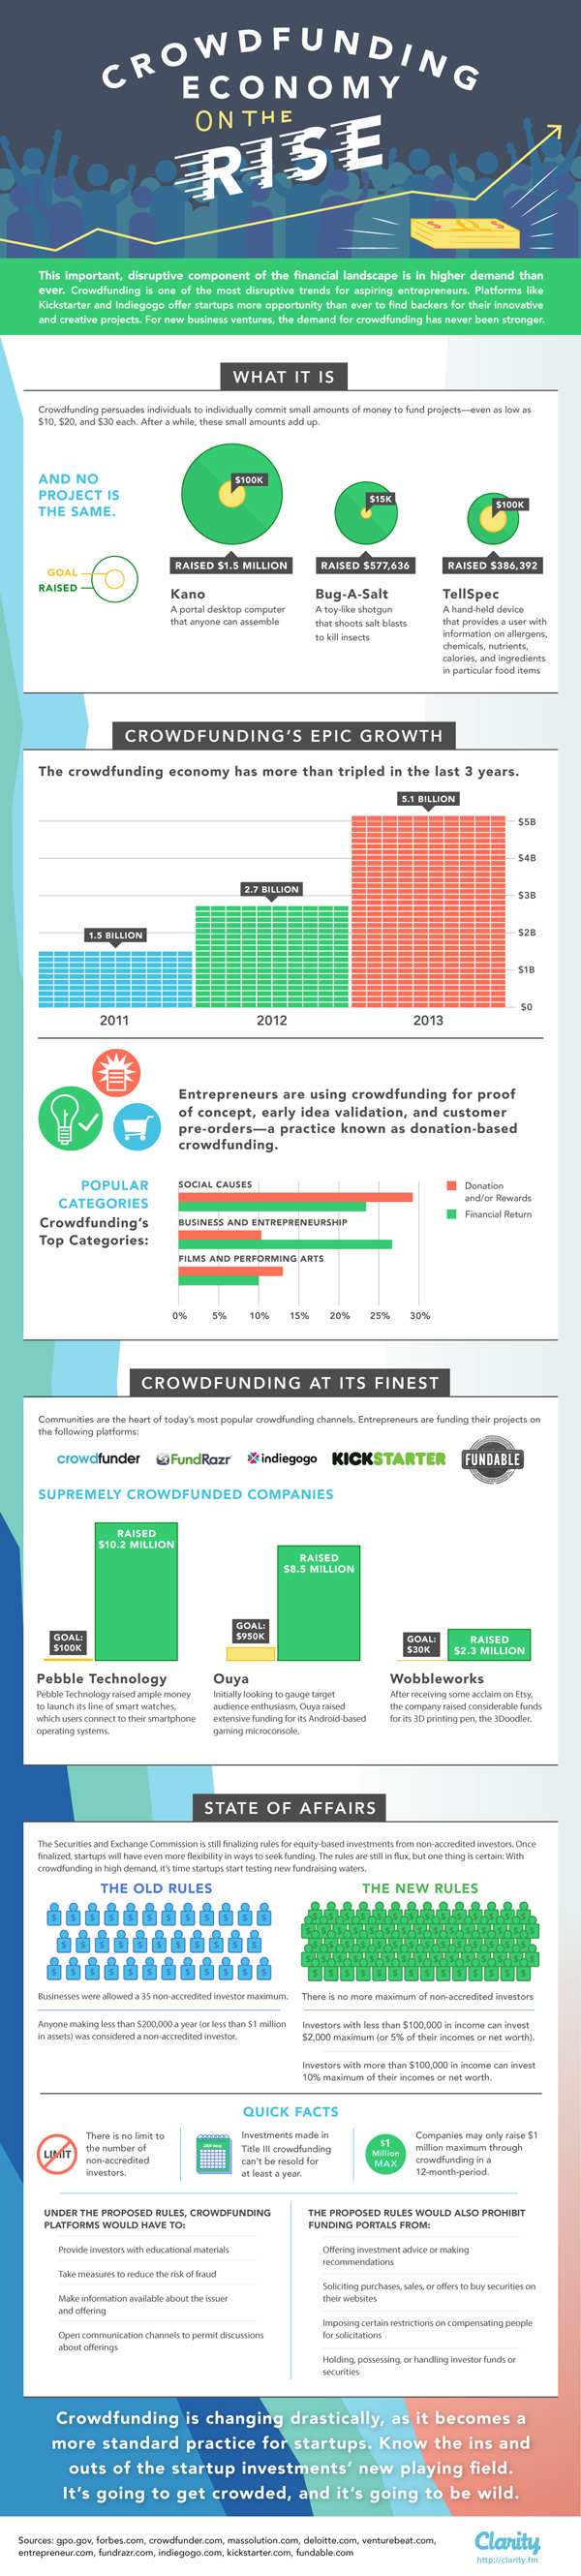 growth-crowdfunding-infographic